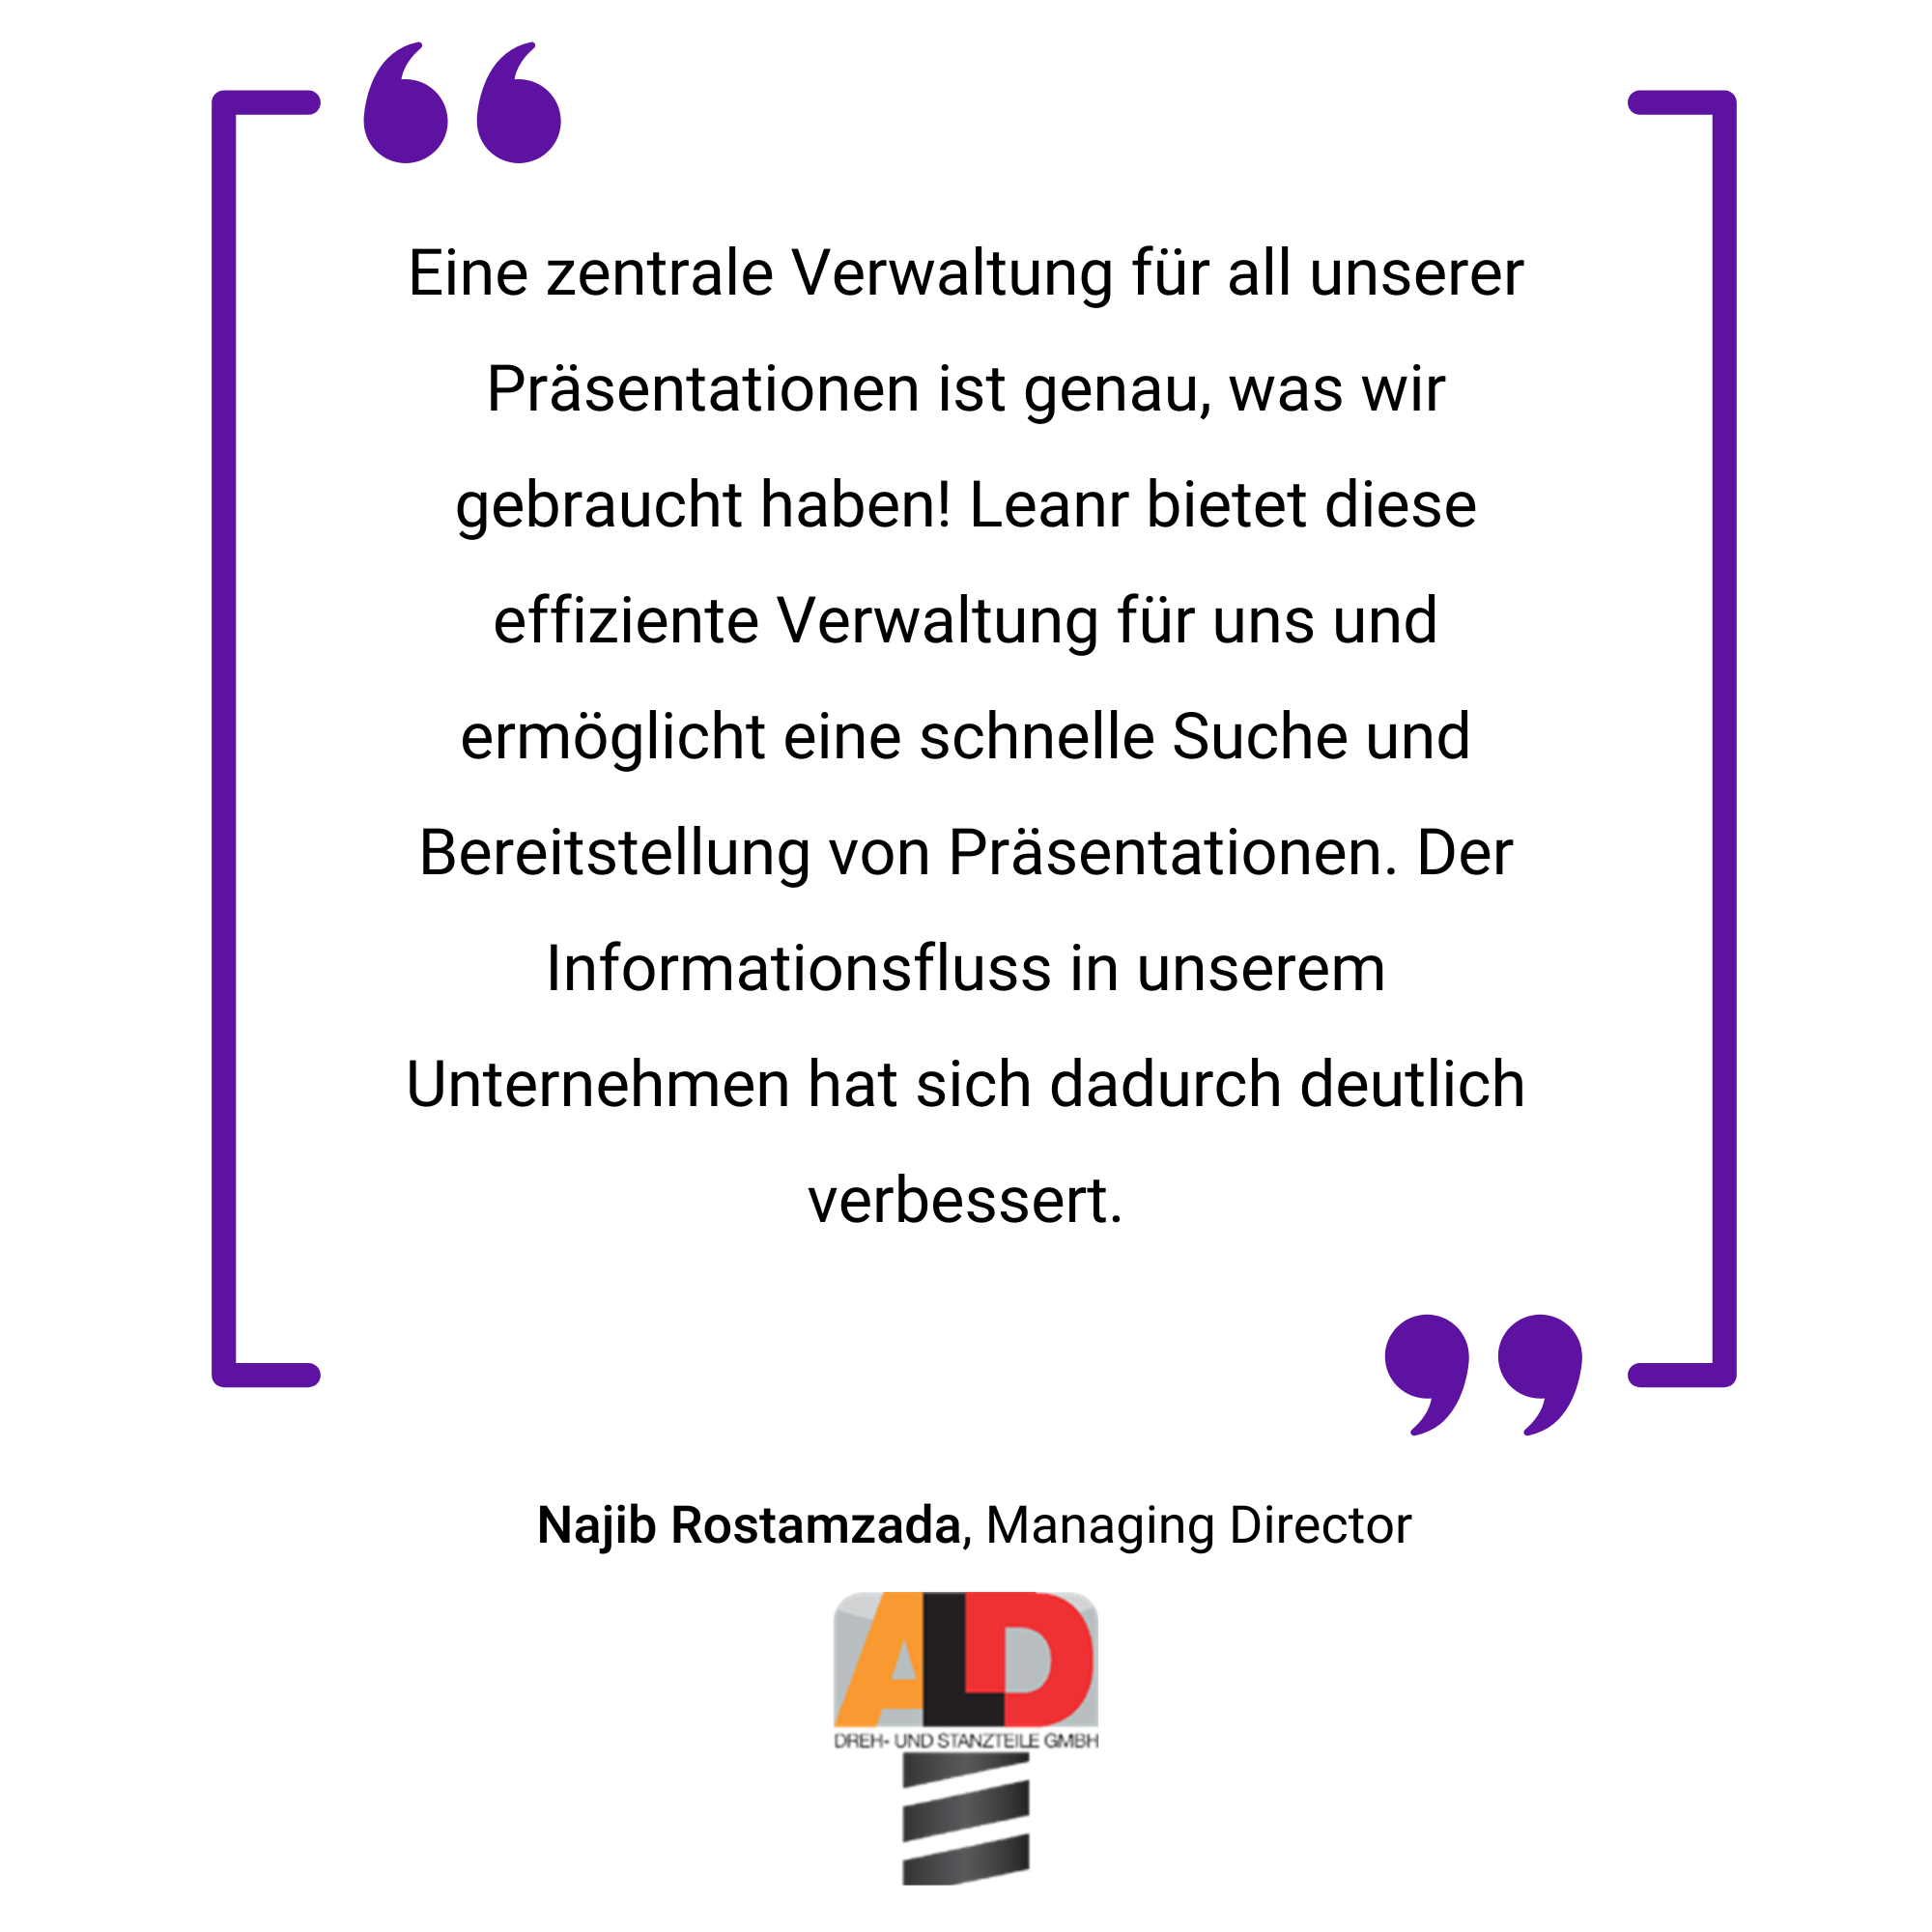 Quote in german about efficient management in a purple box with a cited name, najib rostamzada, and a logo at the bottom right corner.